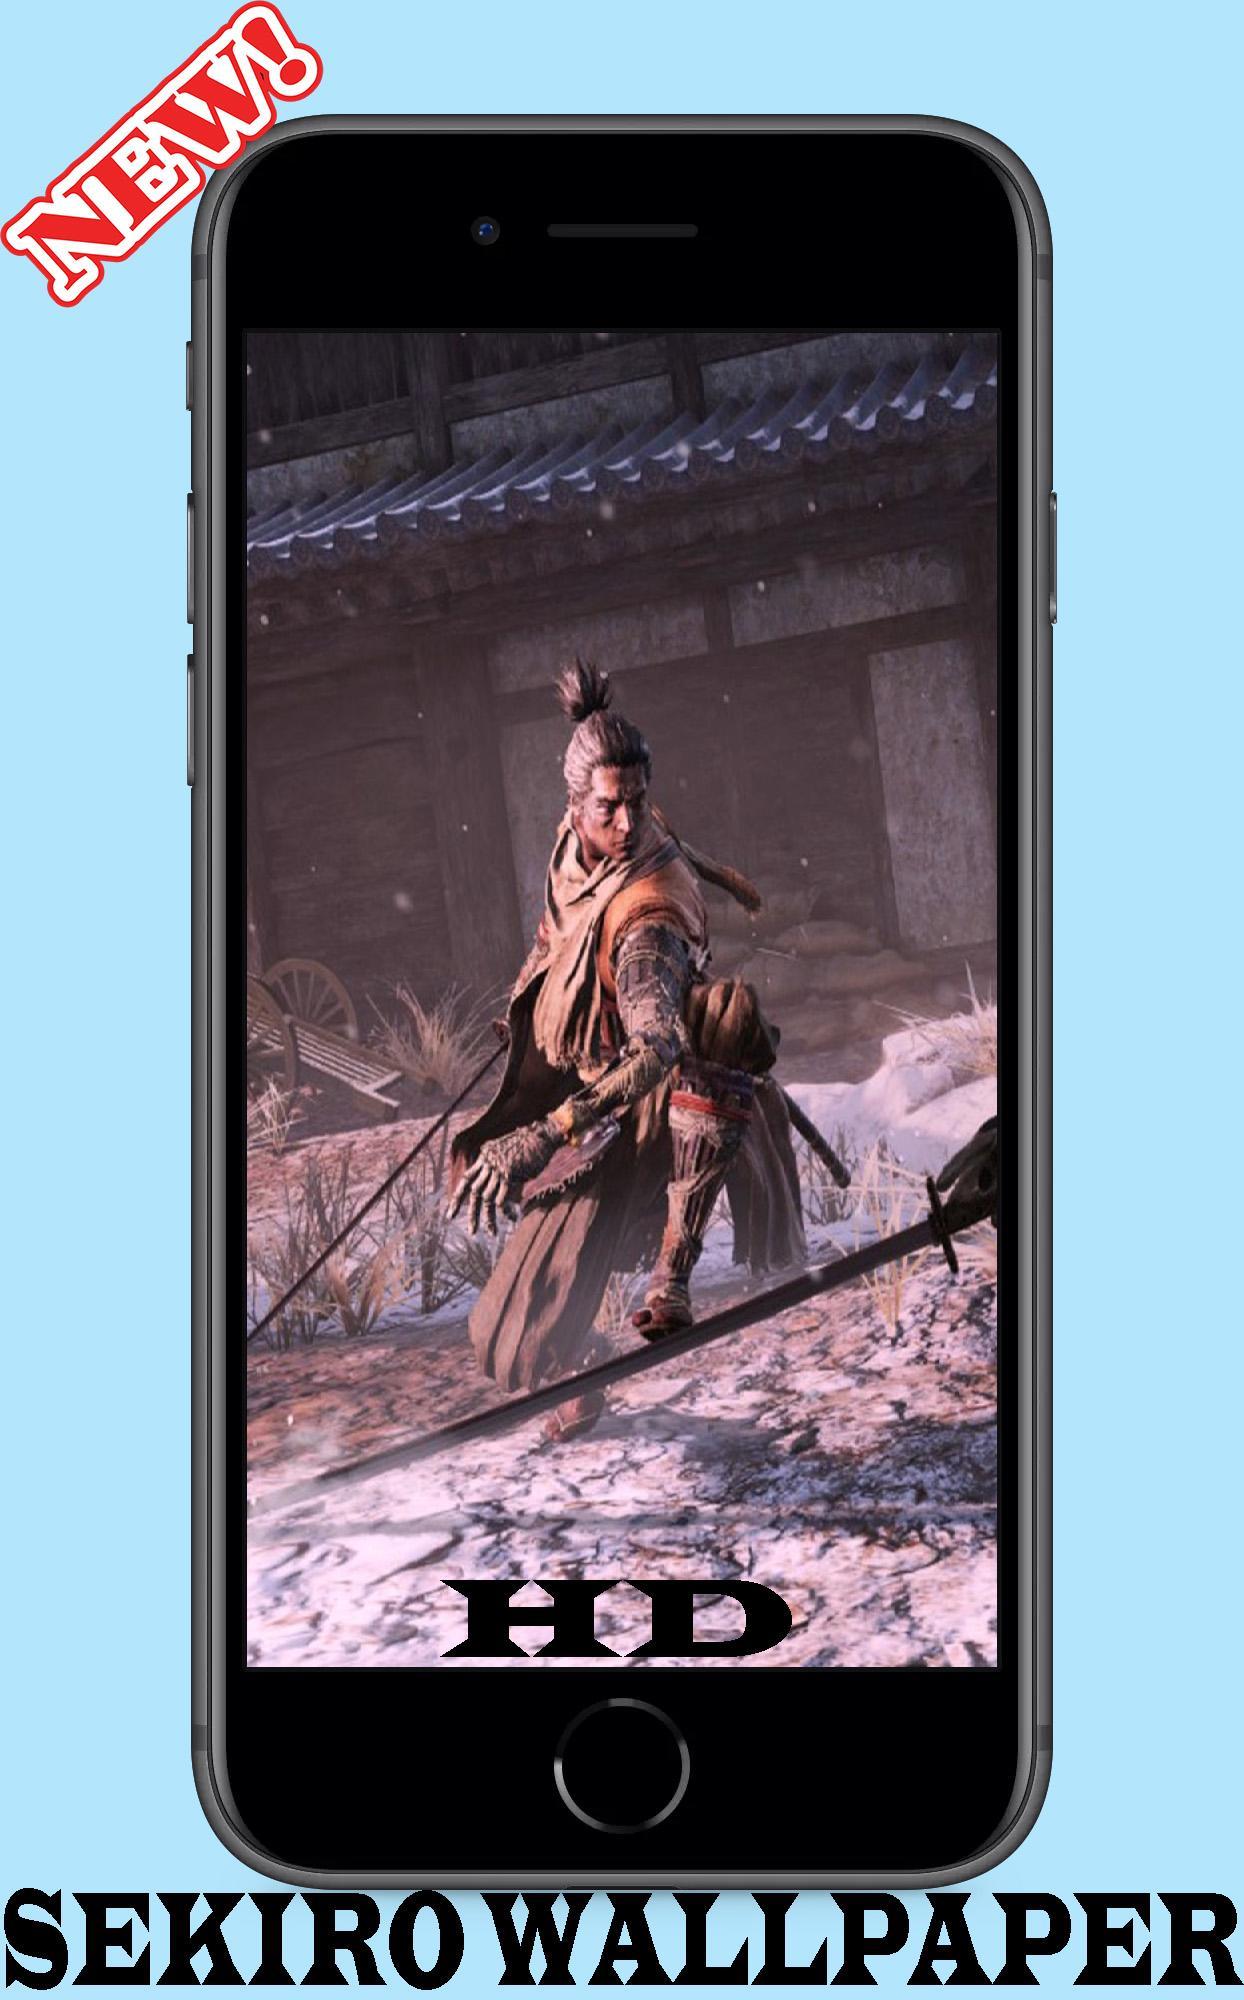 Sekiro Wallpaper For Android Apk Download